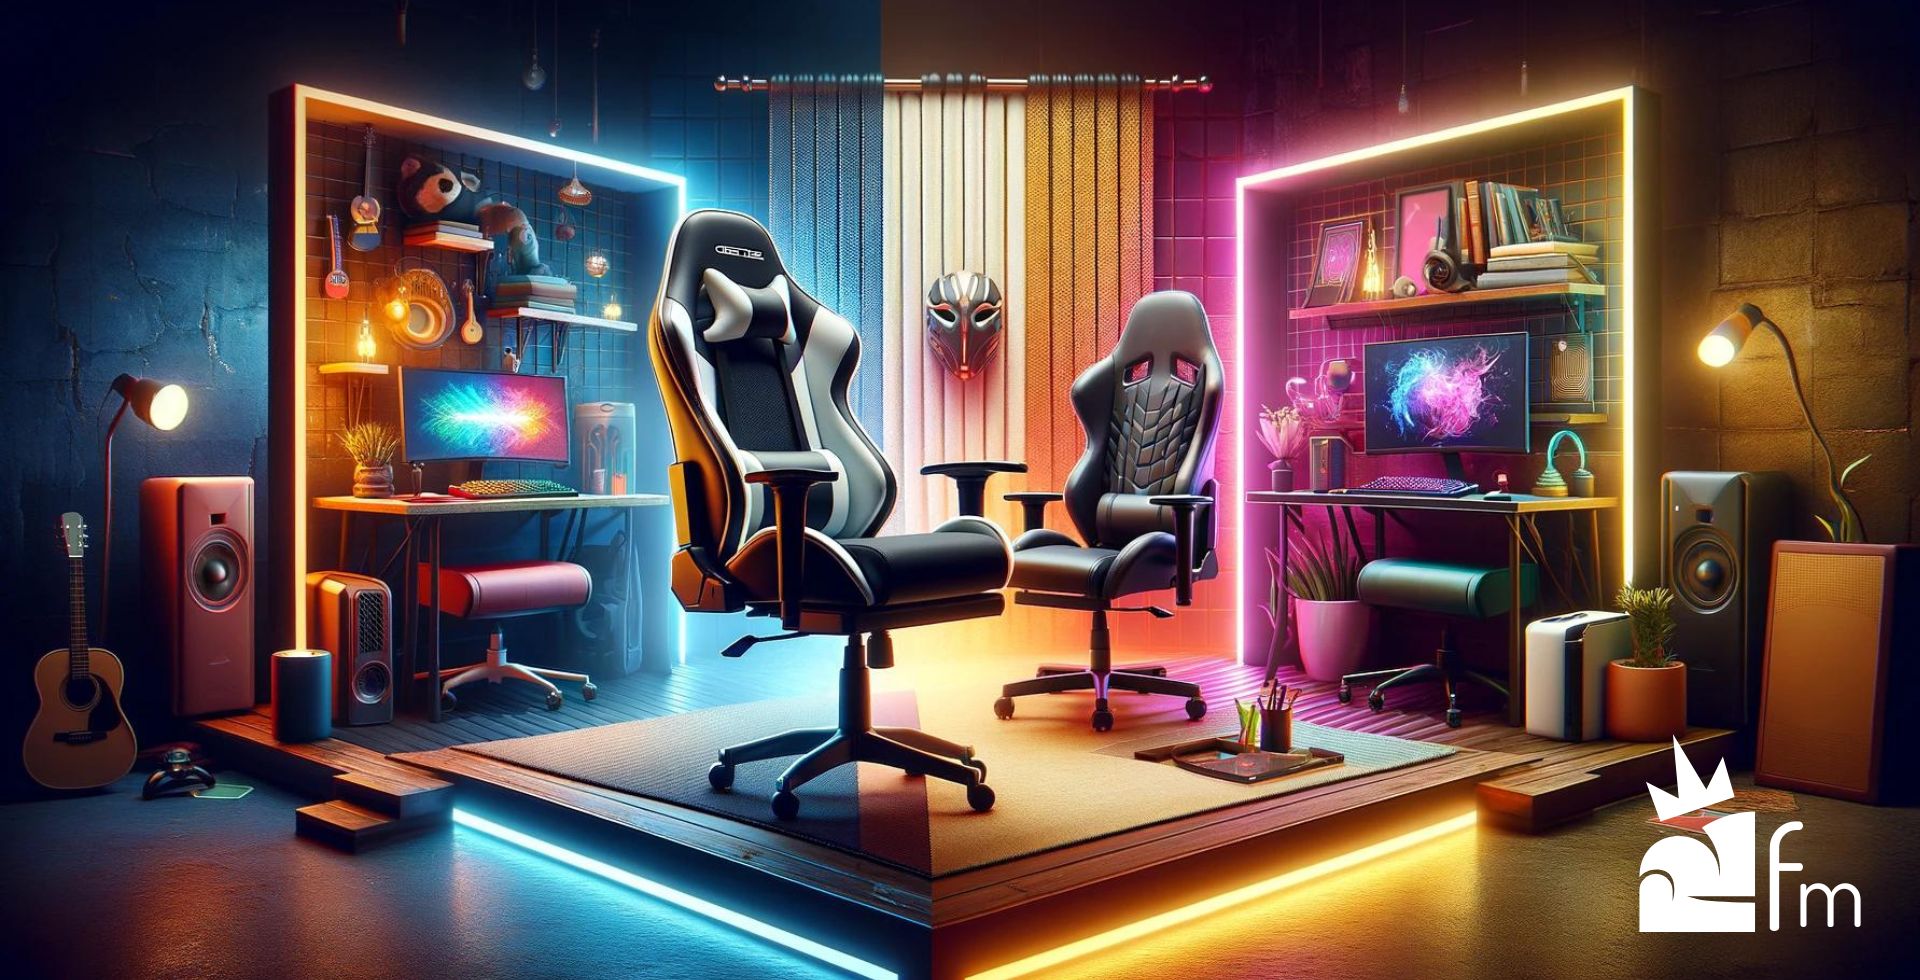 Fabric Vs Leather Gaming Chair Comparison_ Which Type Is Better